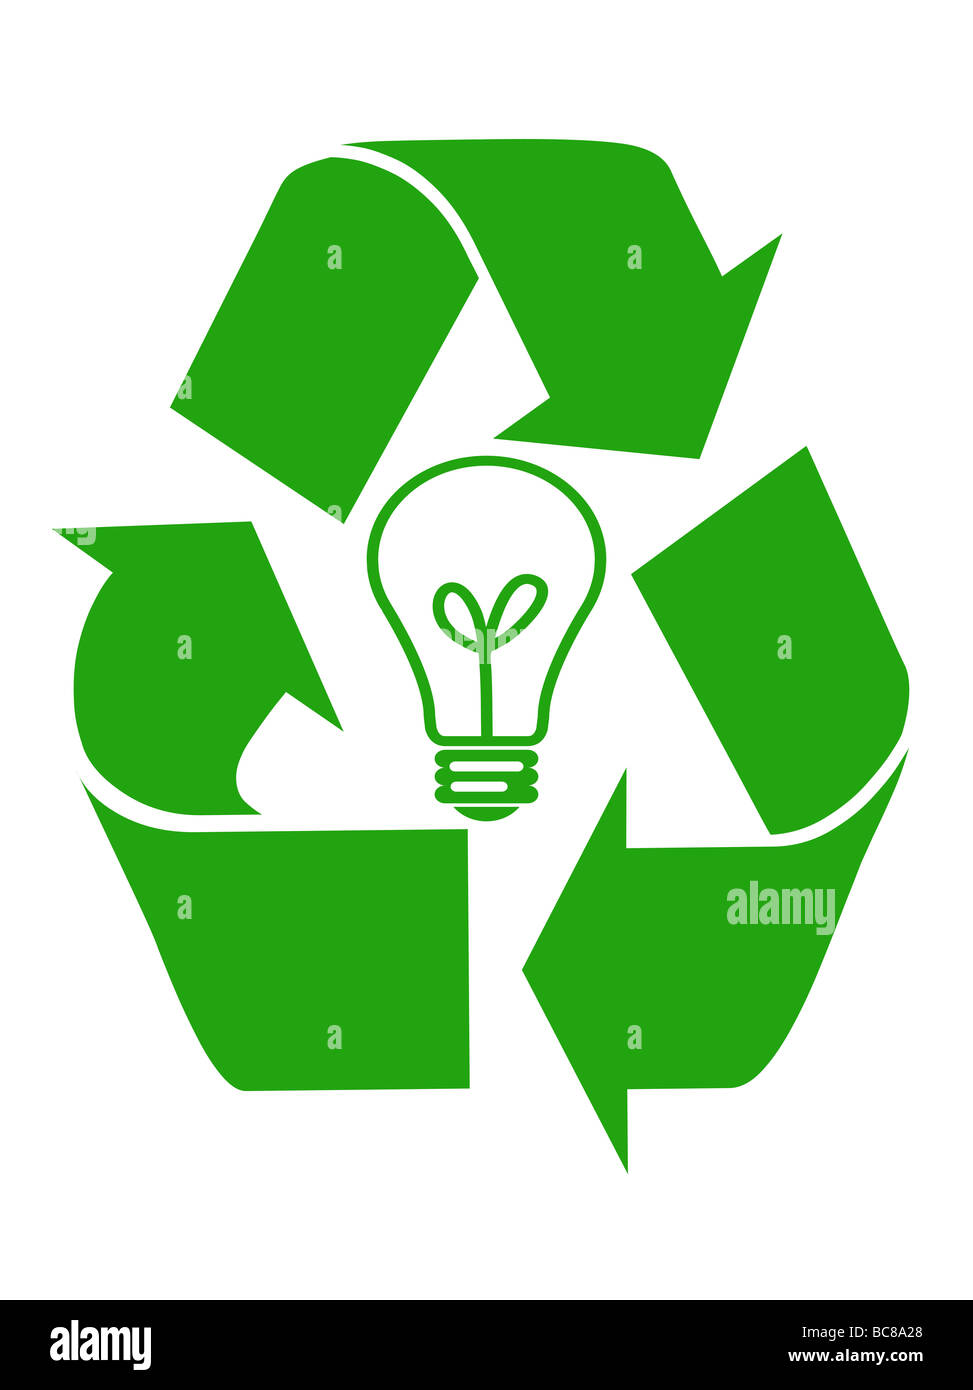 Green recycling symbol with lightbulb in center representing ideas isolated on white background Stock Photo